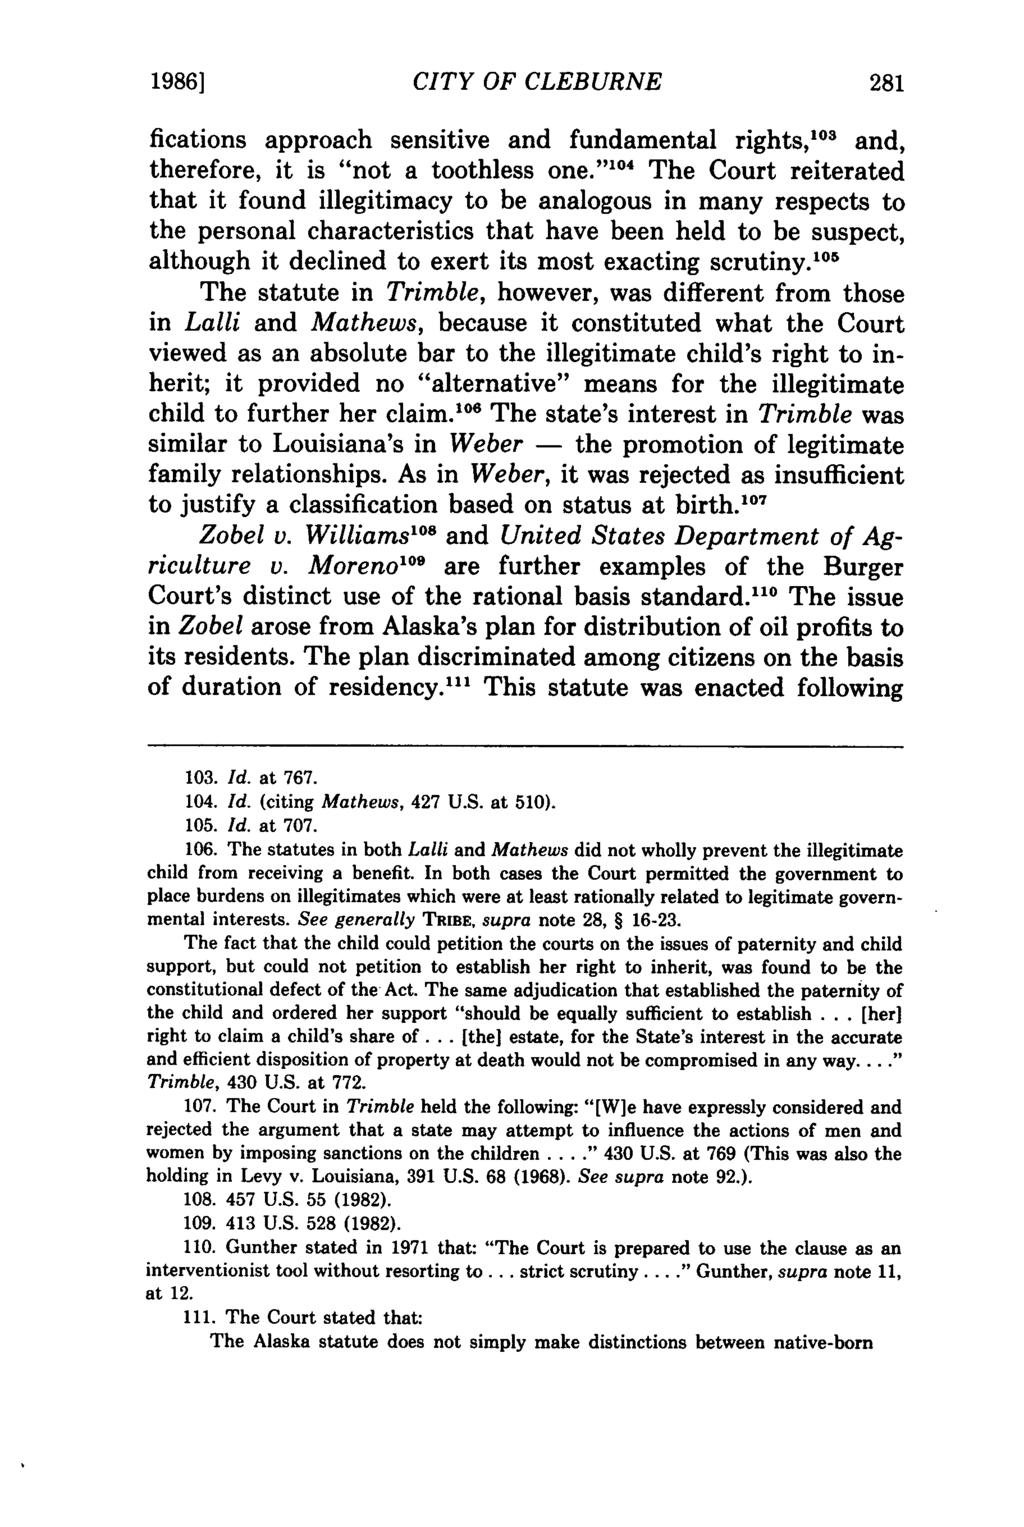 1986] CITY OF CLEBURNE fications approach sensitive and fundamental rights, 103 and, therefore, it is "not a toothless one.